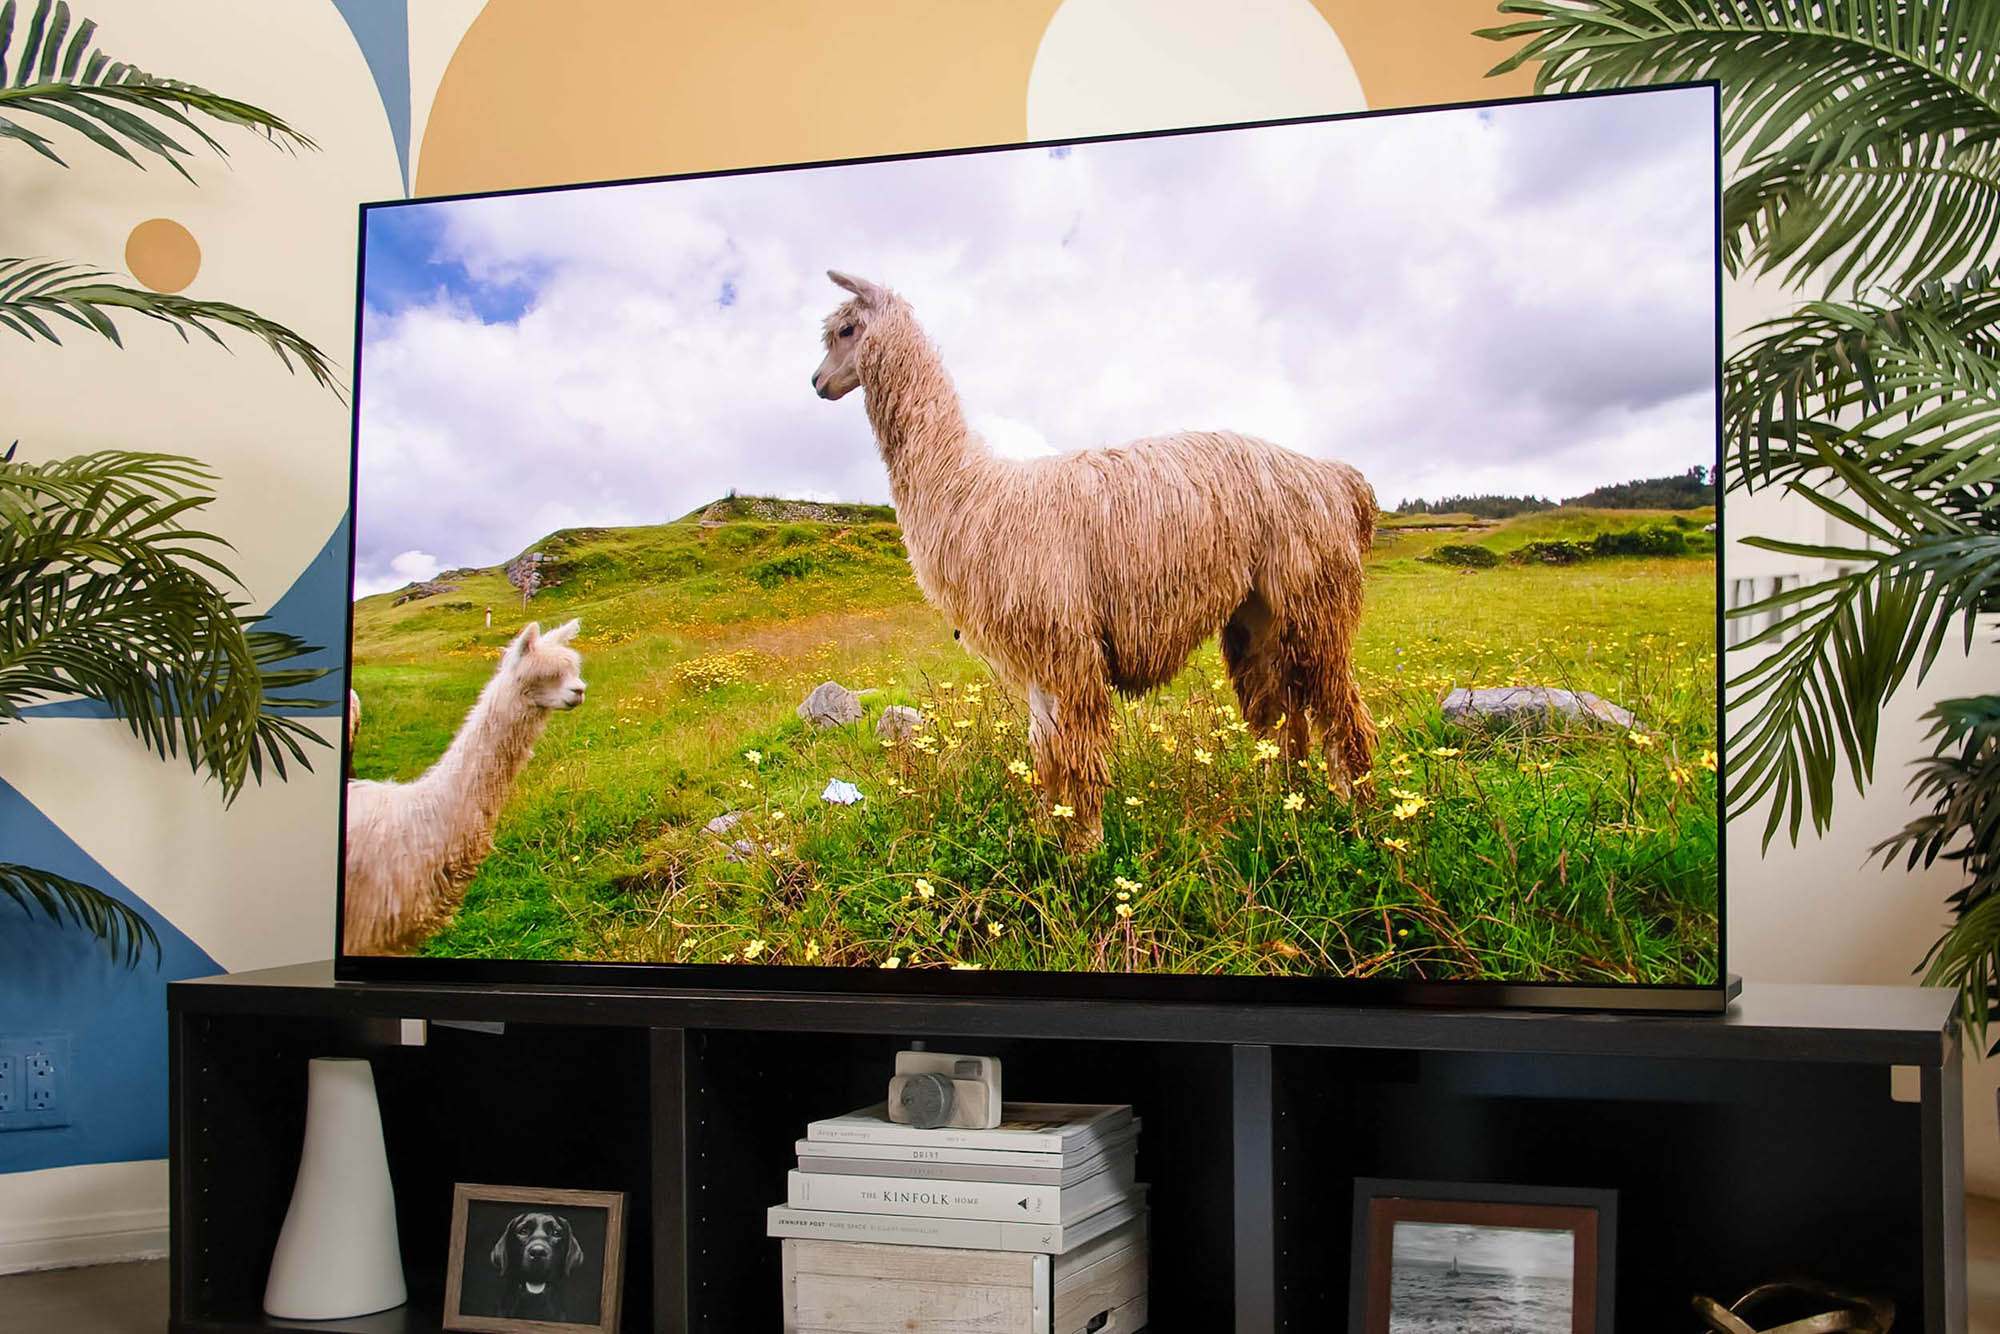 Alpacas stand in a field in the show Our Planet on the Sony A95K TV.